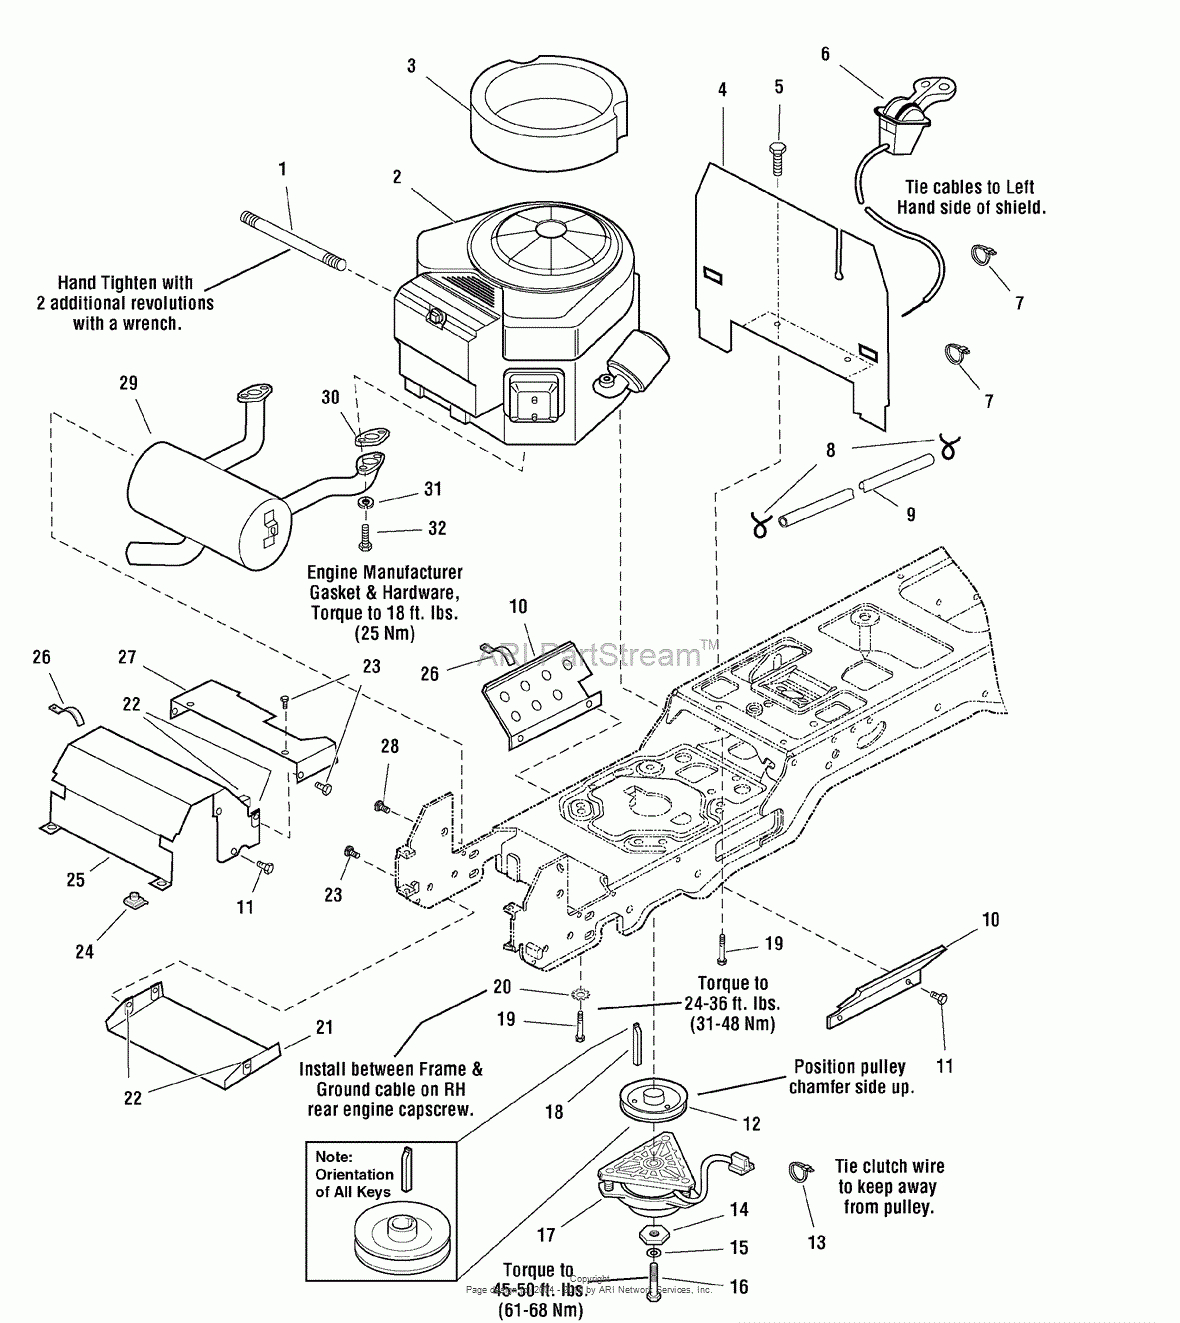 Briggs 18 Hp Wiring Diagram | Wiring Library - Briggs And Stratton Wiring Diagram